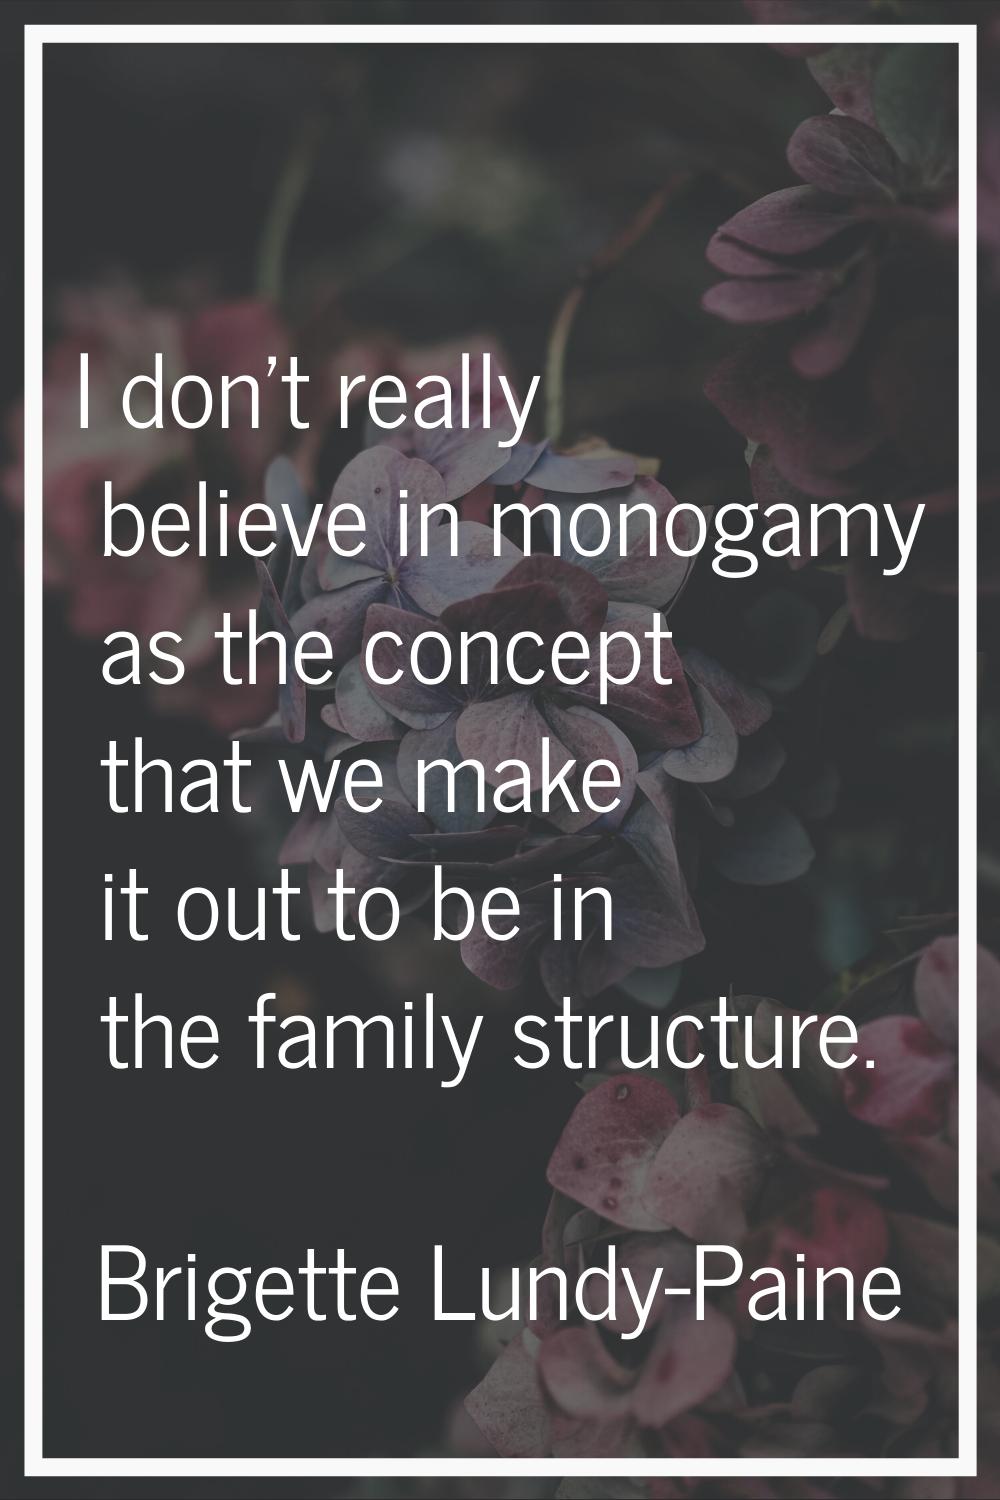 I don't really believe in monogamy as the concept that we make it out to be in the family structure